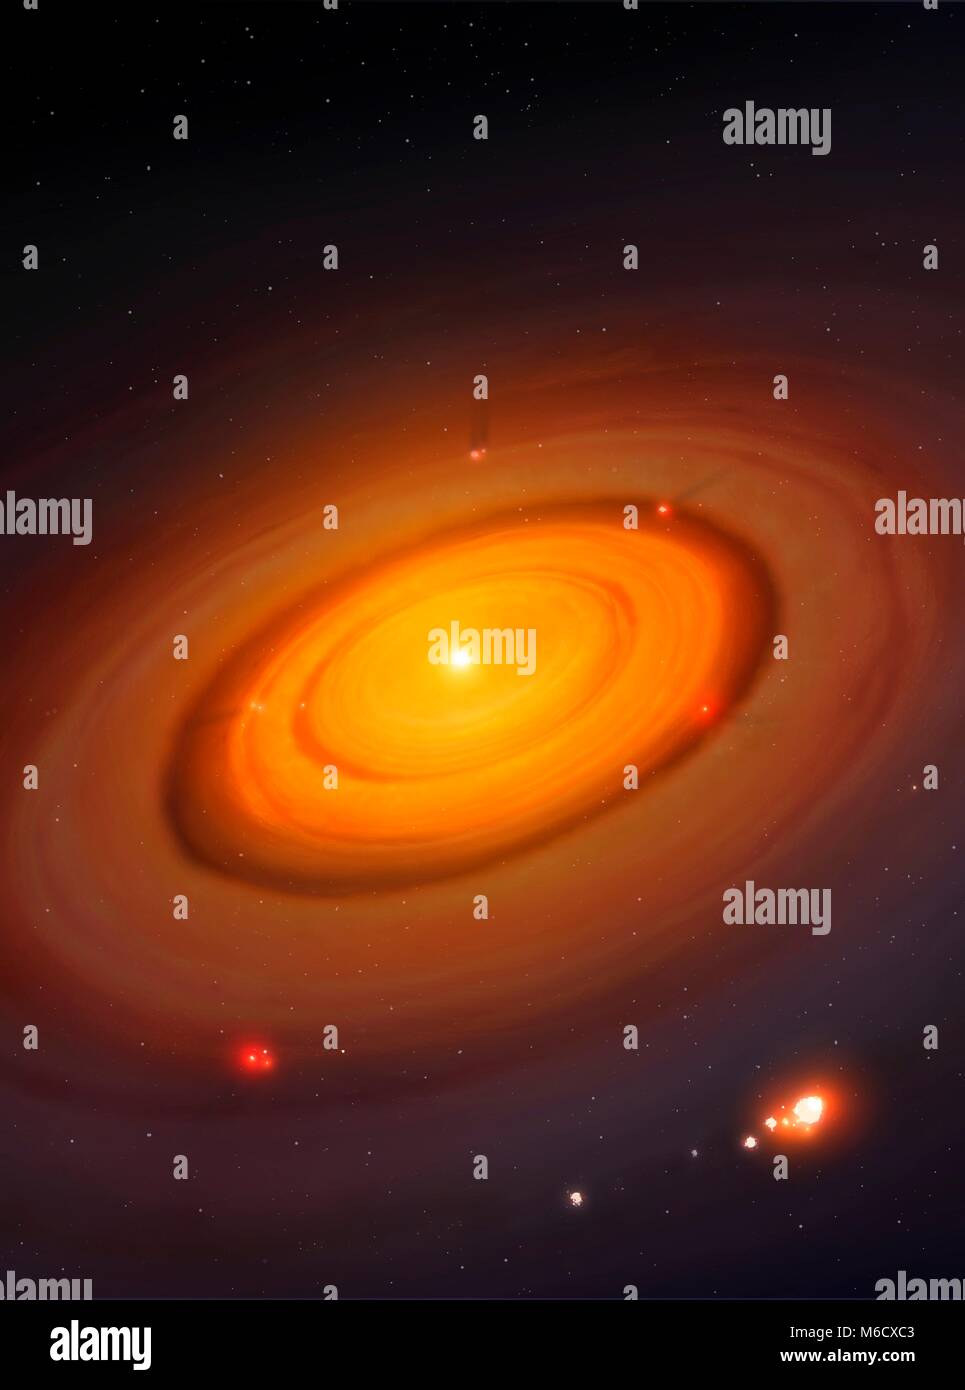 Formation of moons around a gas giant. This is how the moons of Jupiter and Saturn, and possibly Uranus, are thought to have formed. The planet is in the centre, still growing. A concentric disc surrounds it, inside of which the natural satellites are forming via the process of accretion. The illustration could also show the formation of planets around a star, which was a similar process albeit on a far larger scale. Stock Photo